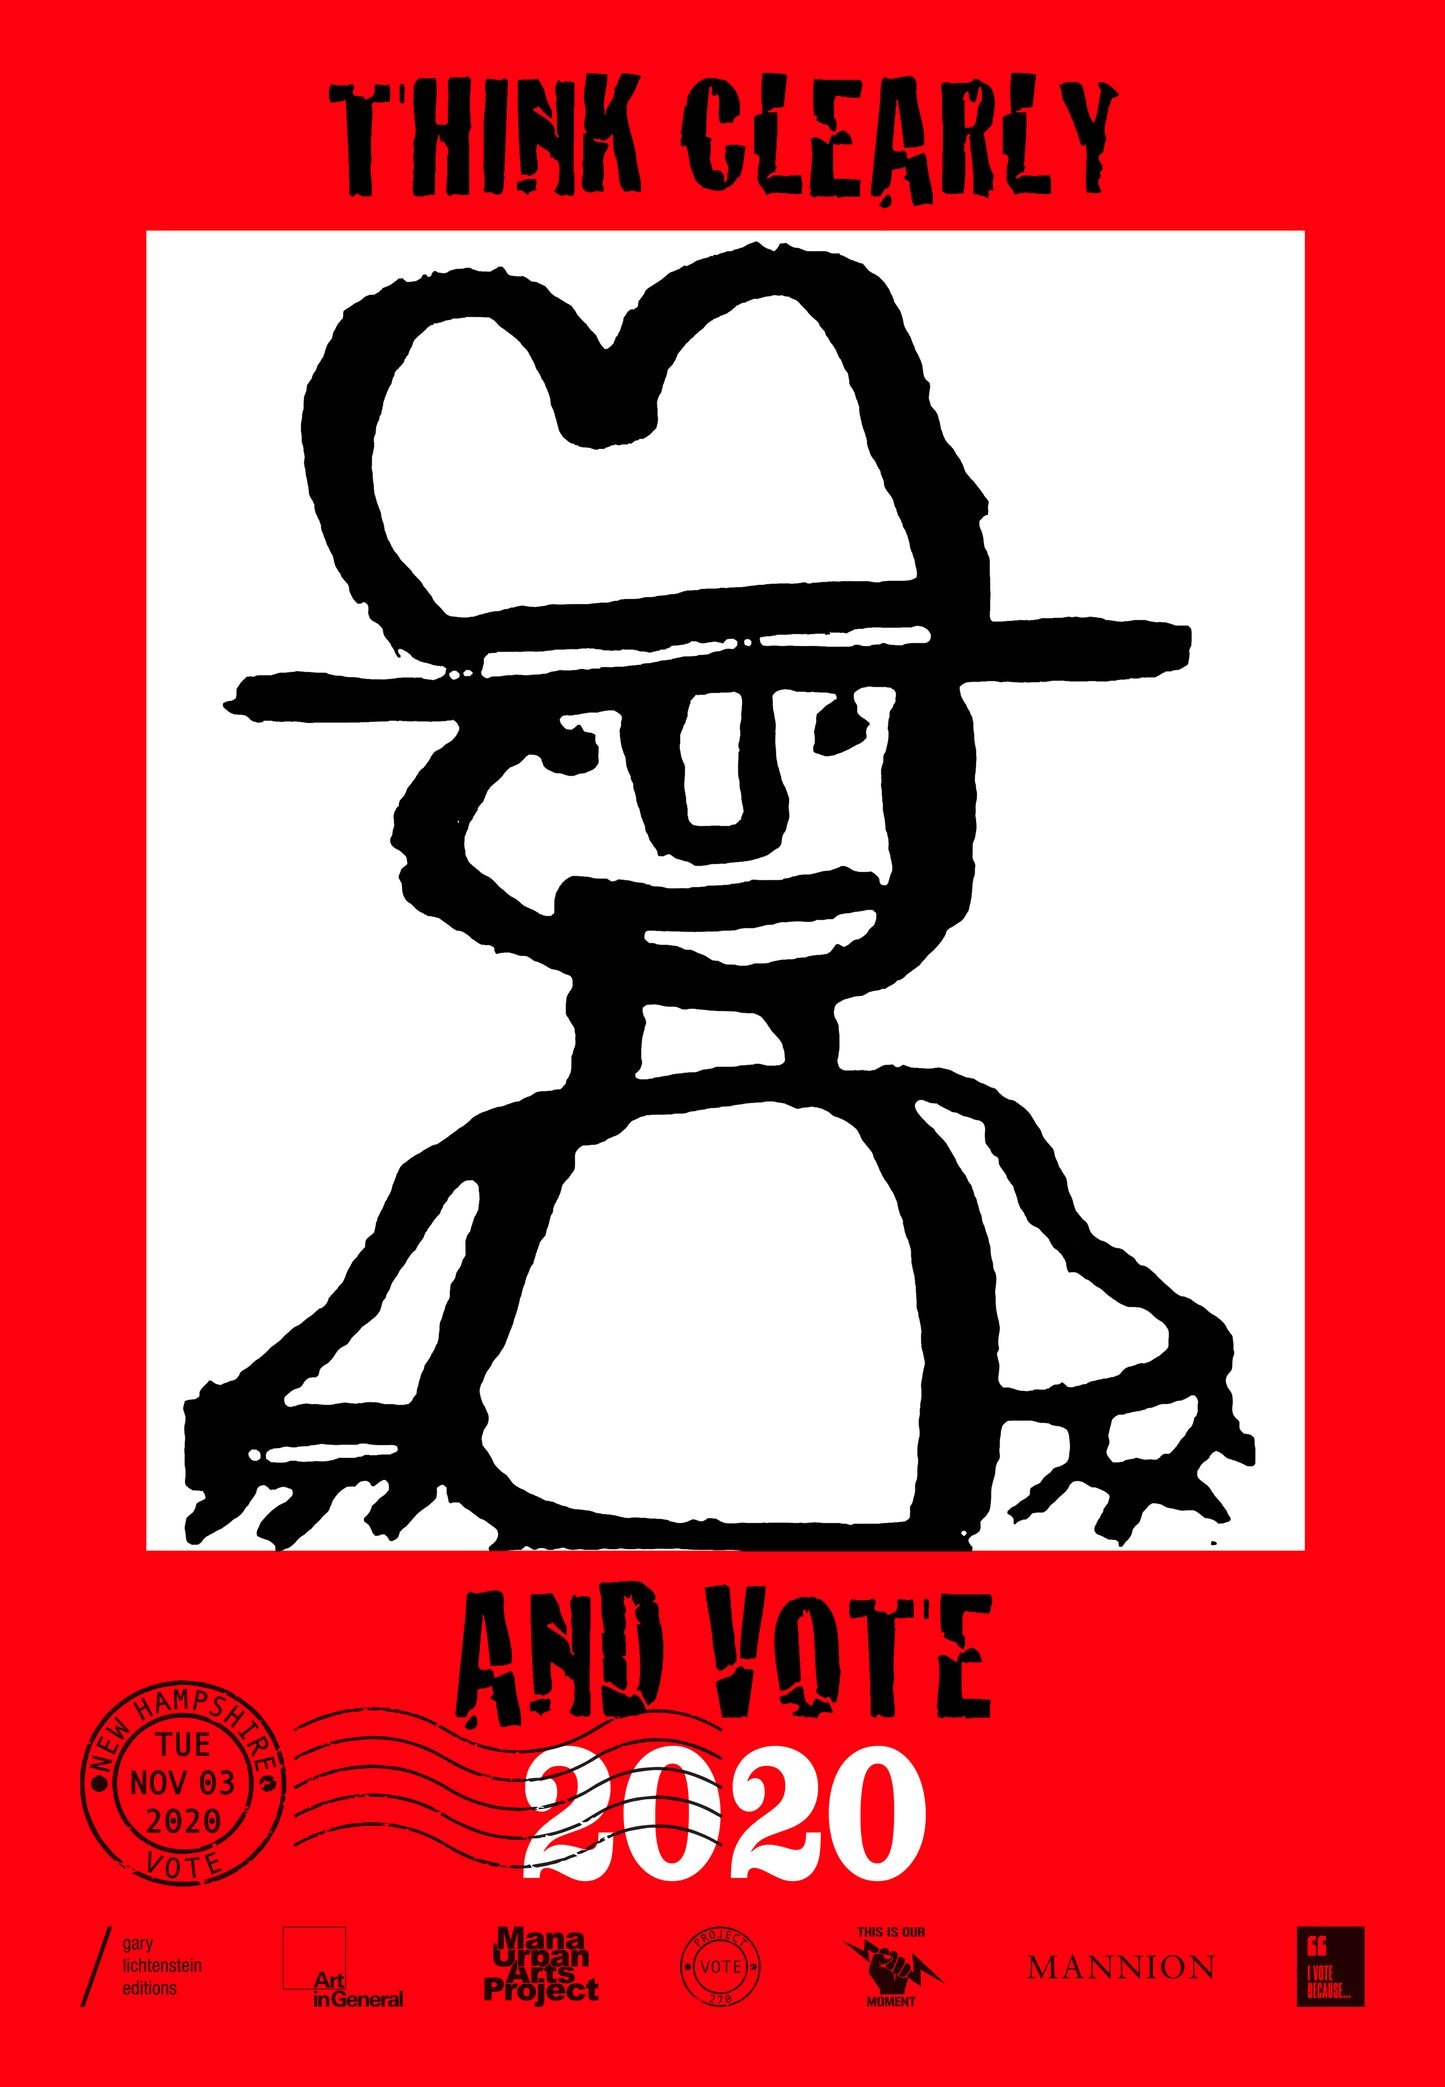 New Hampshire Get Out The Vote Poster by Phil Demise Smith